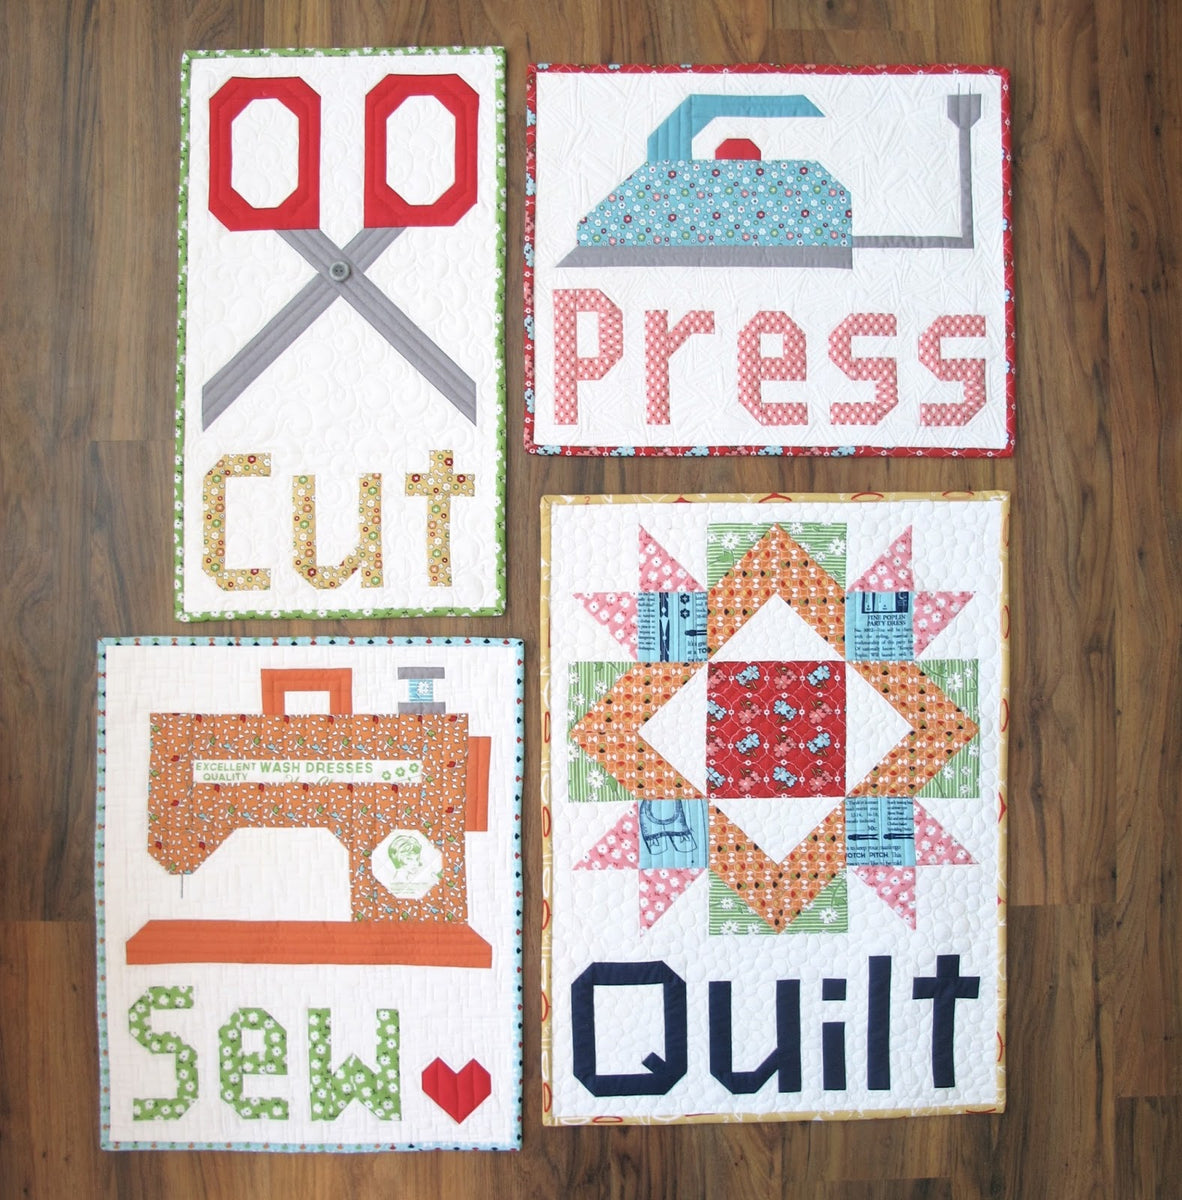 Quilts by Rosemary: Marking a Quilting Pattern with Press'n Seal